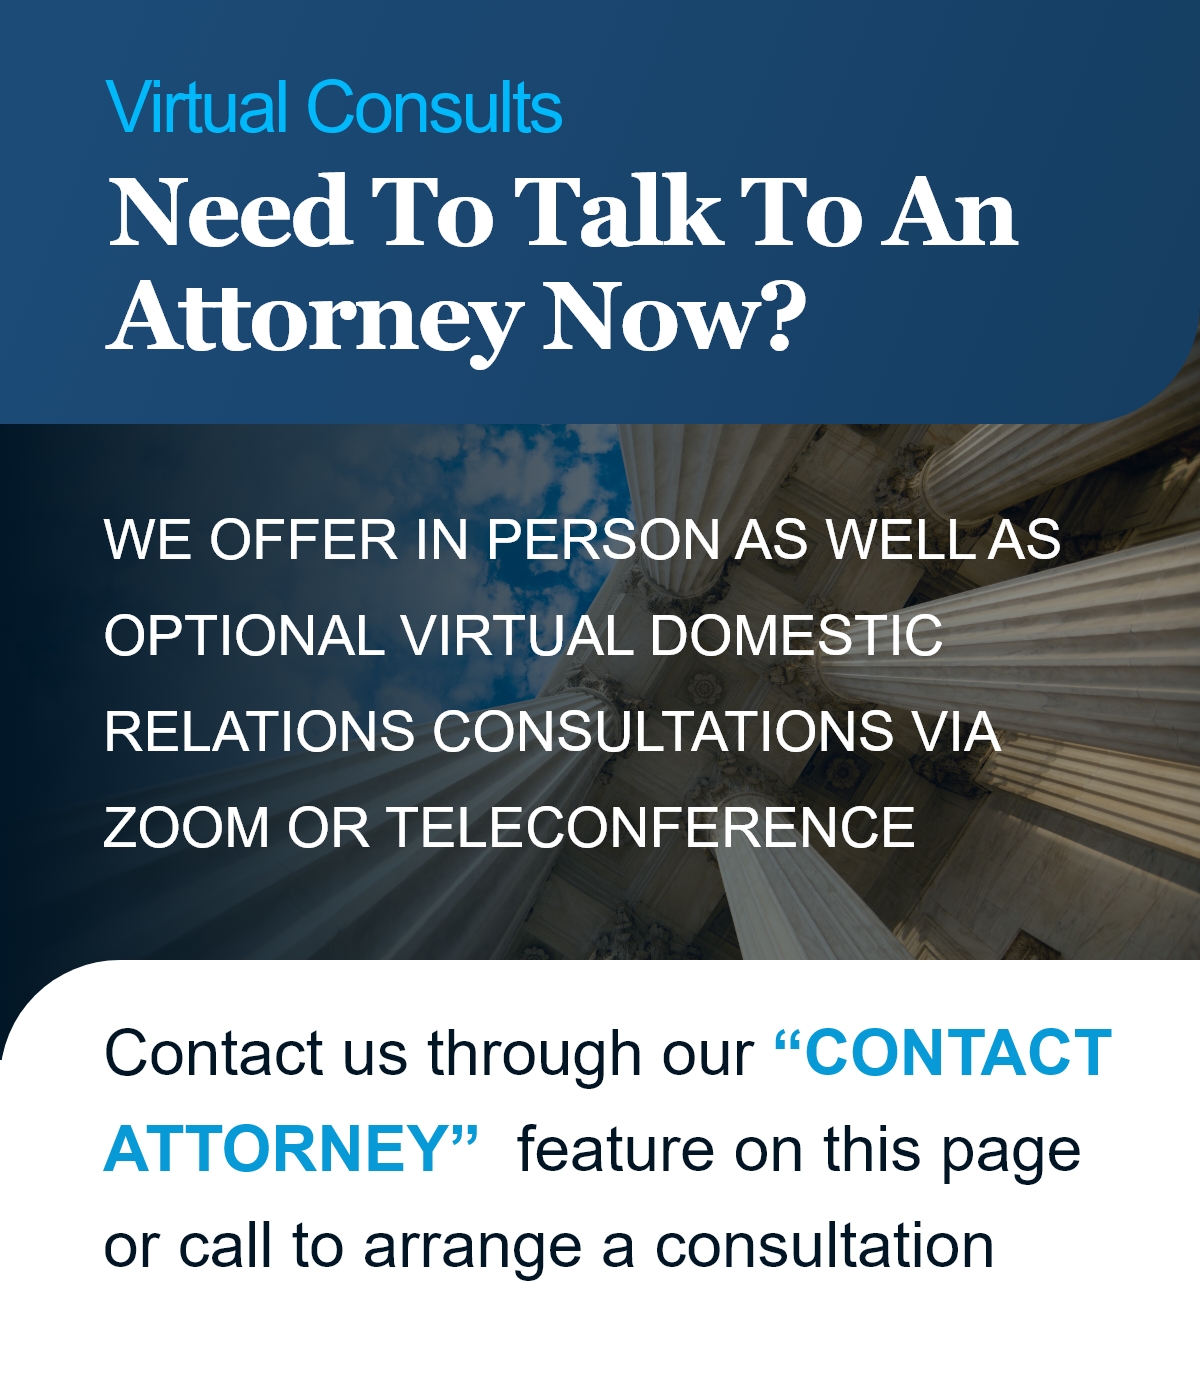 Need To Talk To An Attorney Now?